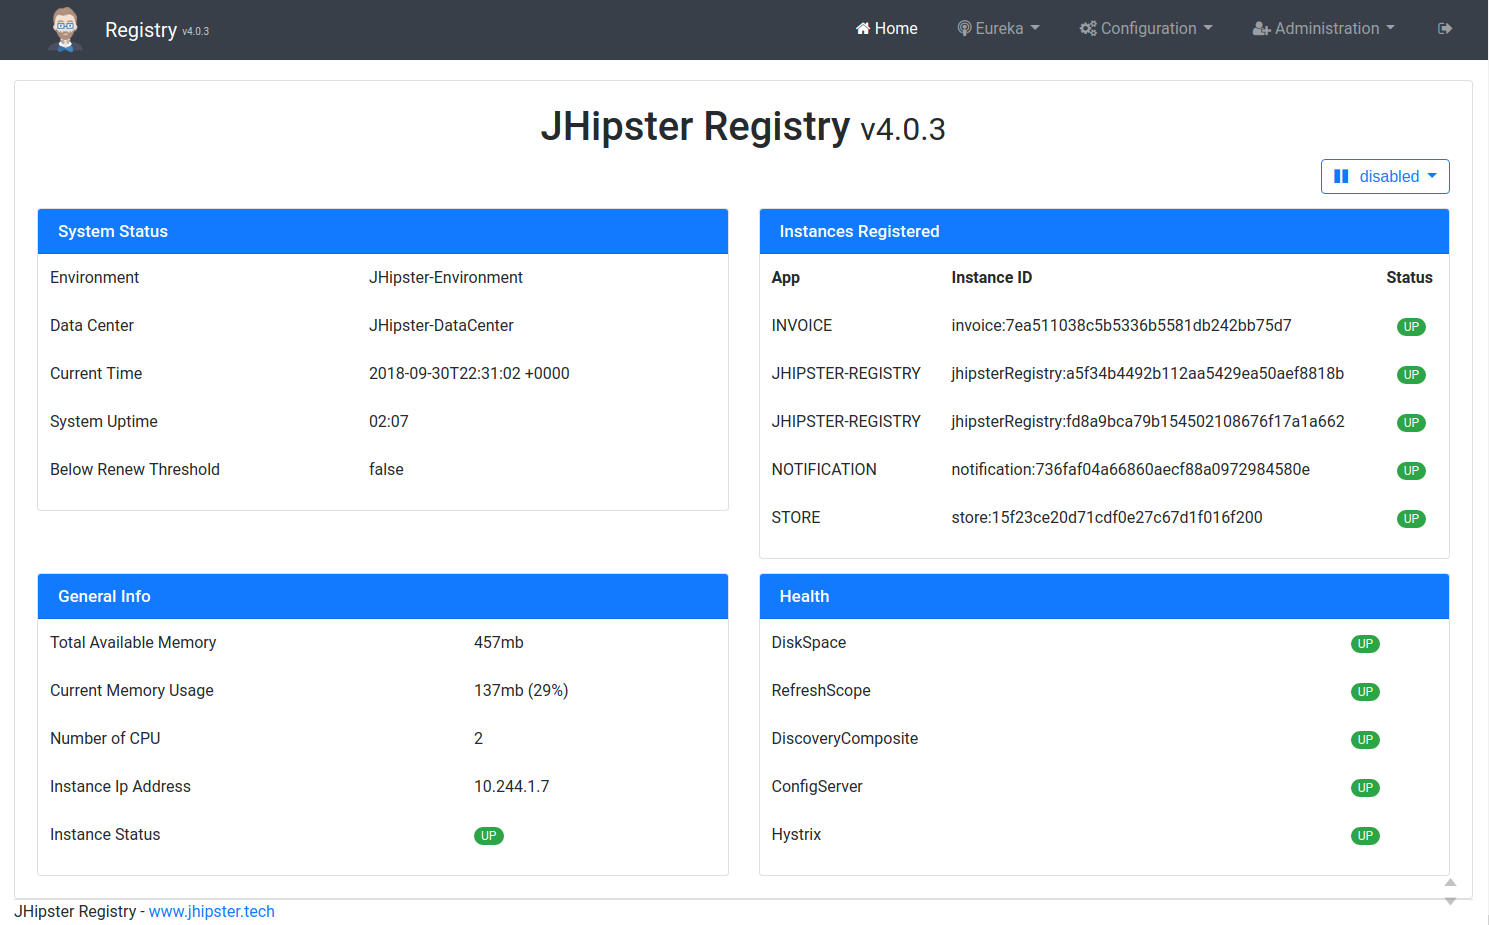 JHipster Registry home page